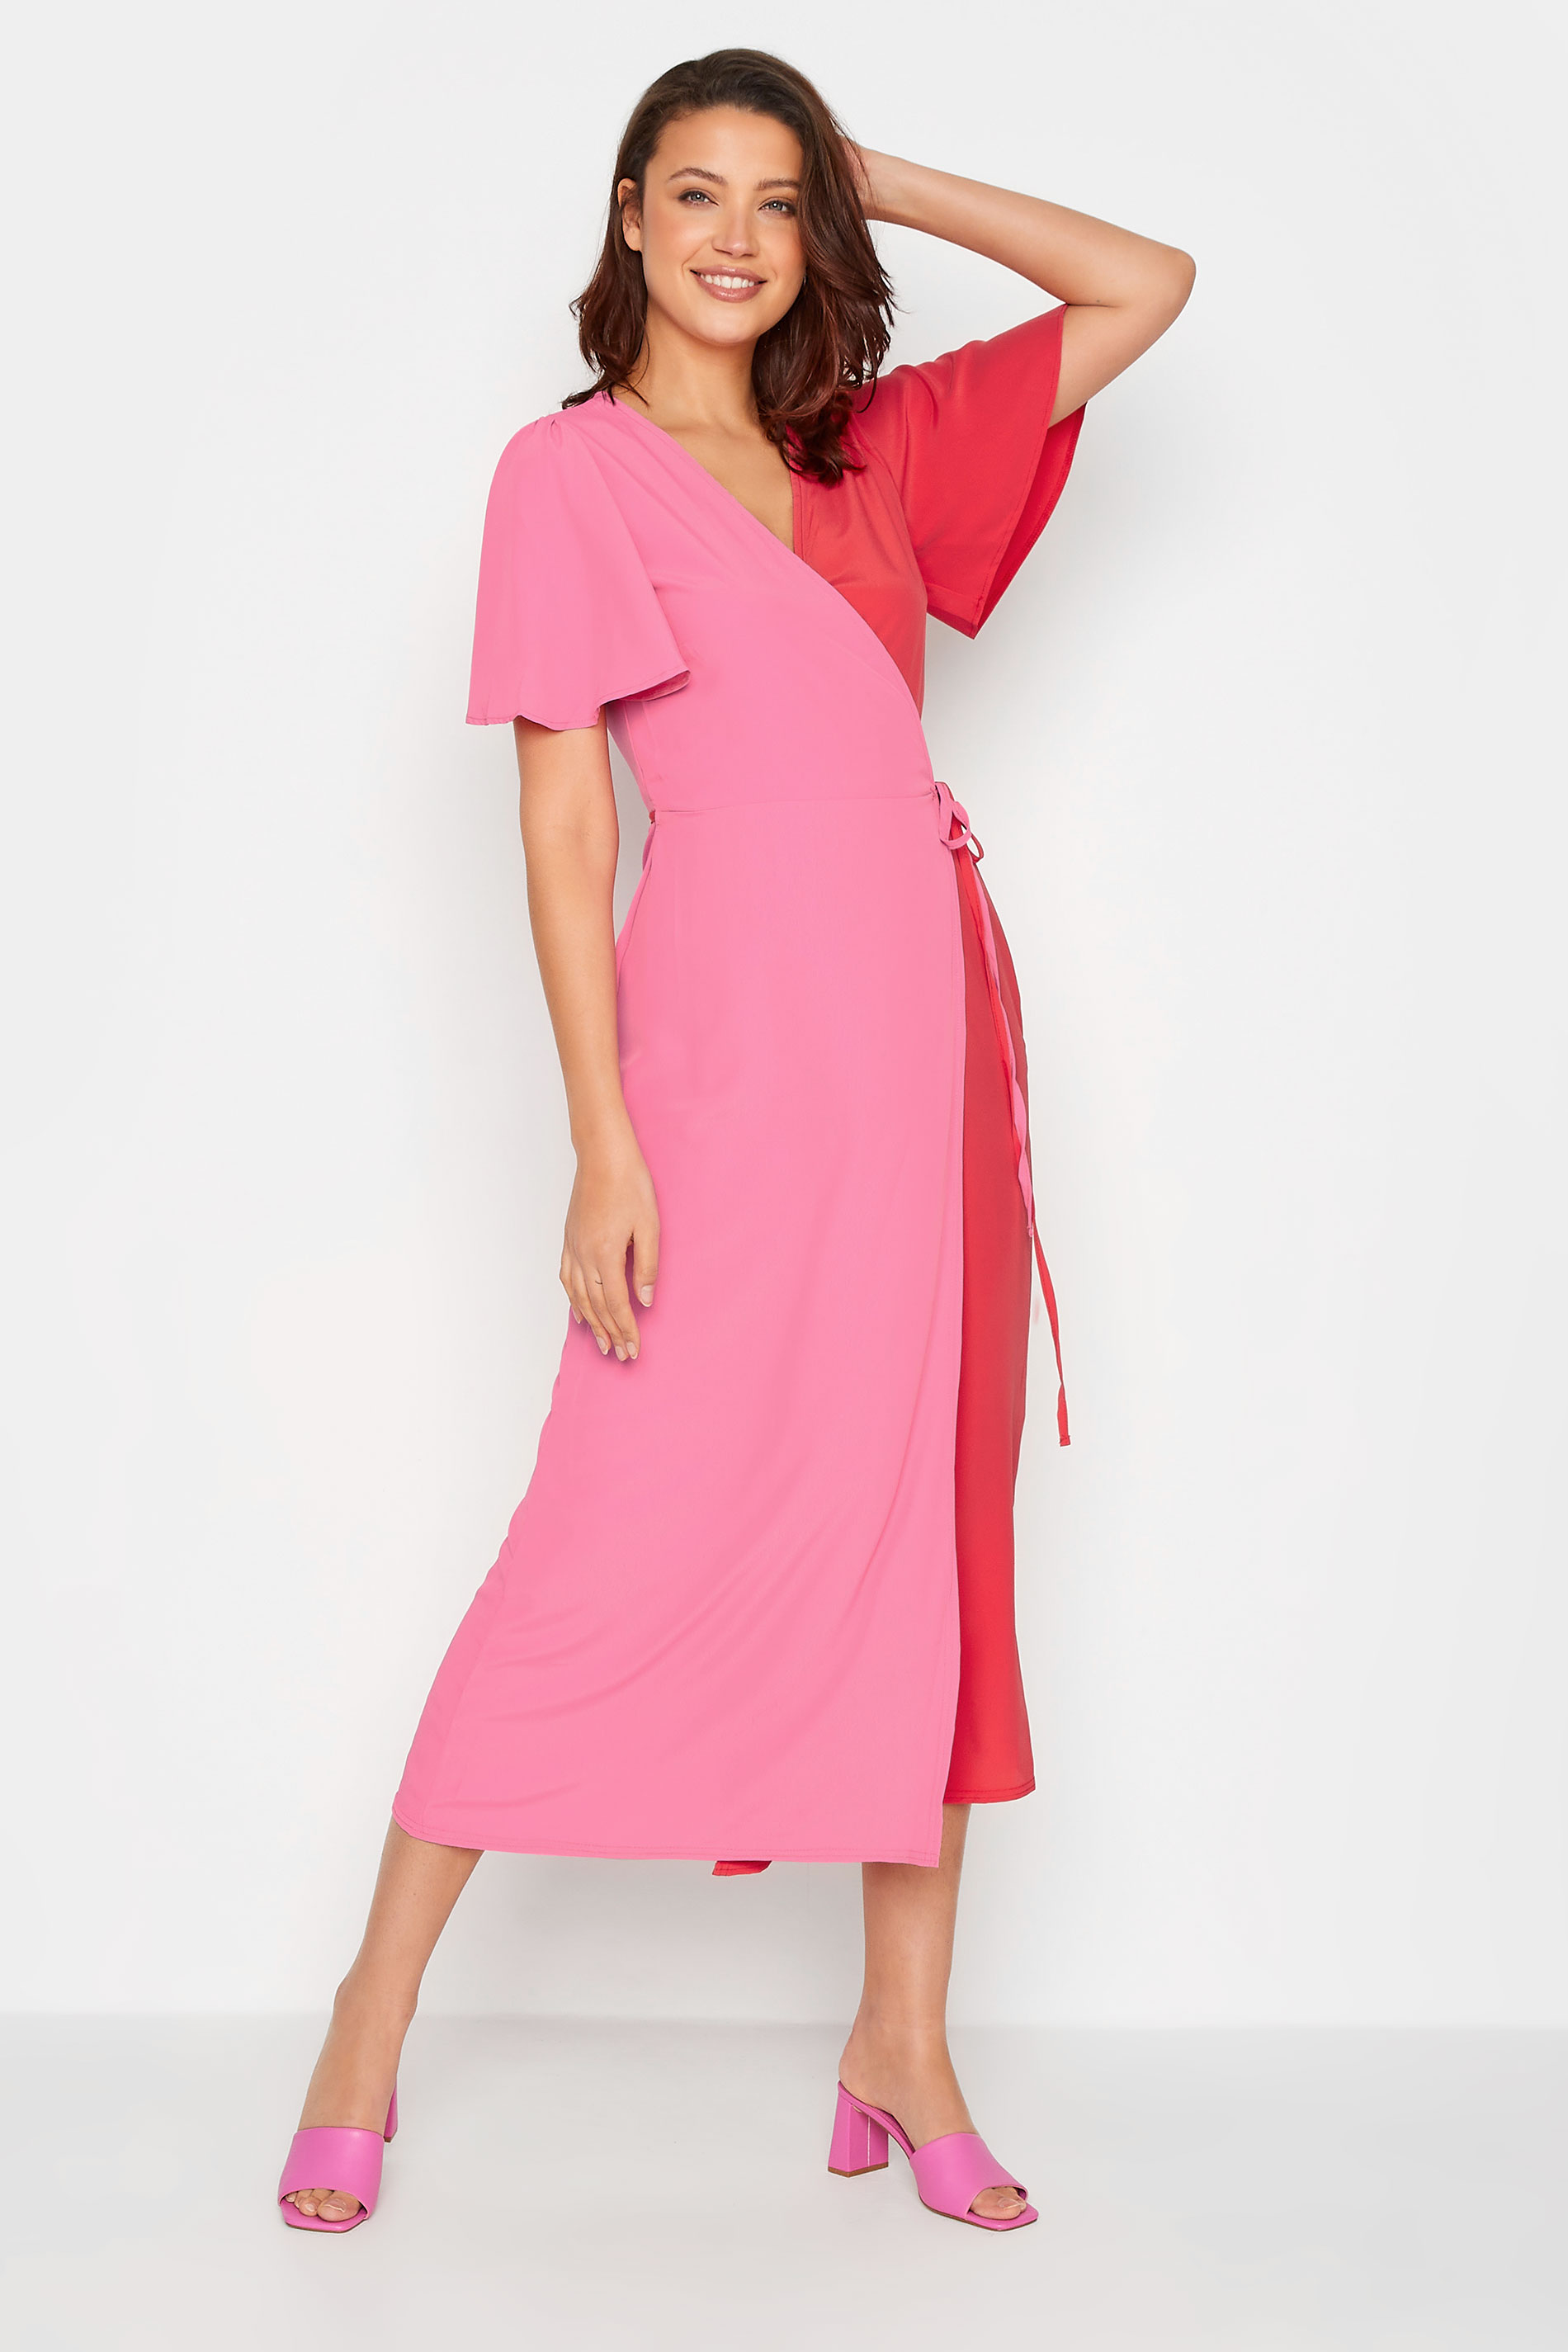 LTS Tall Women's Pink & Red Two Tone Wrap Dress | Long Tall Sally 1